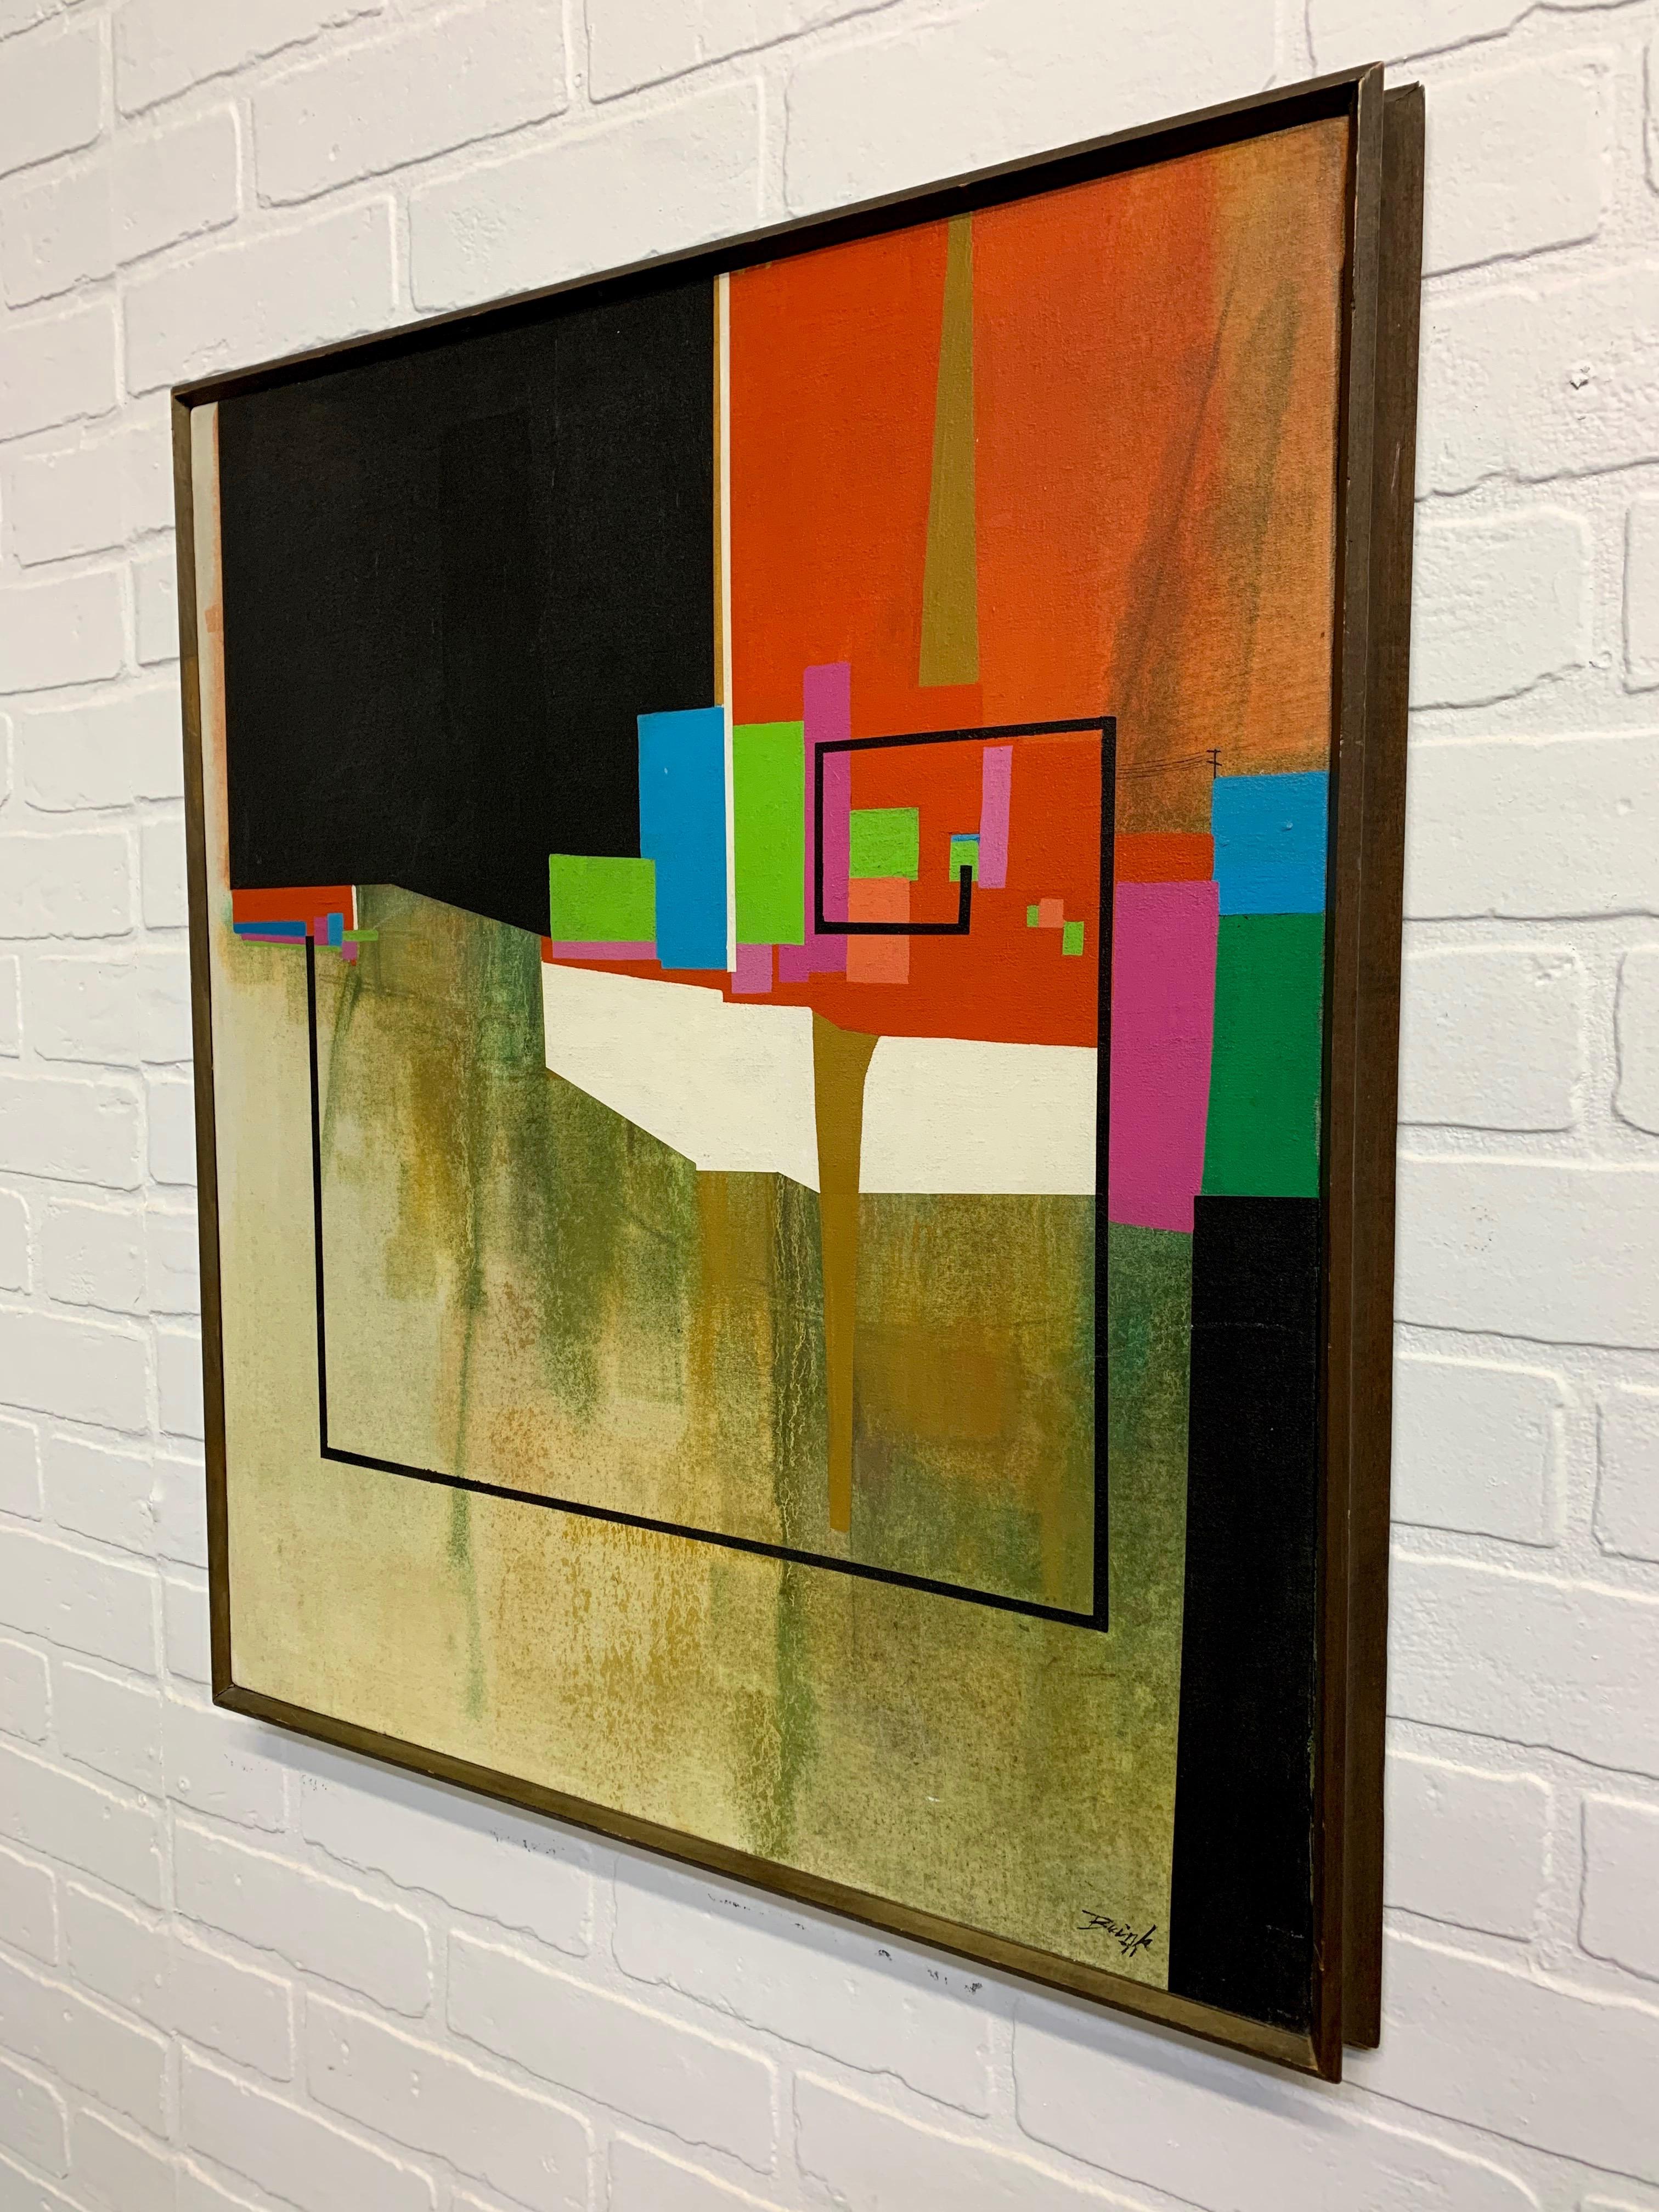 Oil on canvas painting of geometric shapes signed Brink.